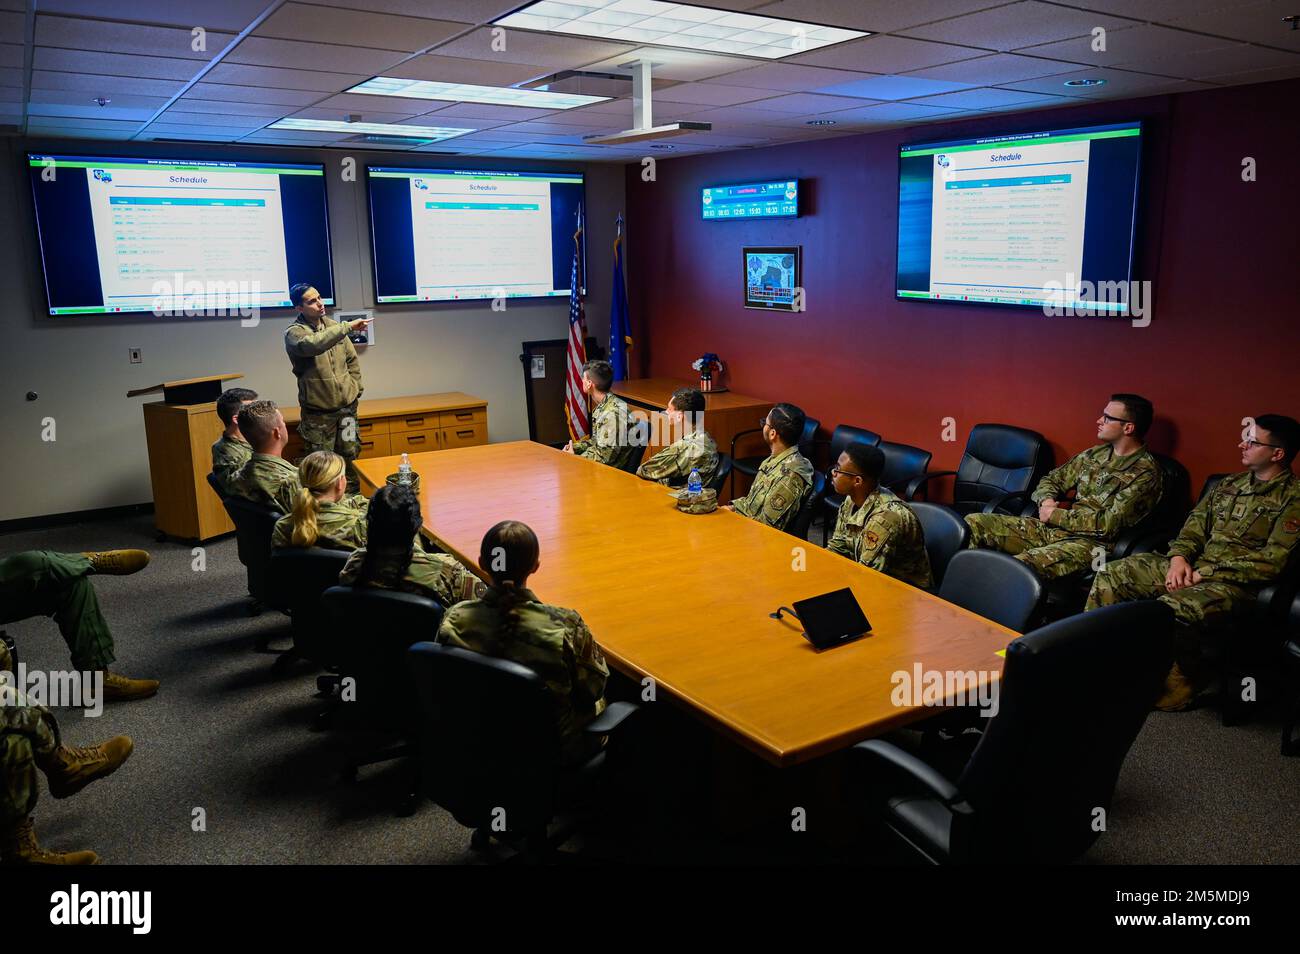 U.S. Air Force 1st Lt. Alexander Nicklaus, 609th Air Communications Squadron Weapons Systems Operations officer in charge, briefs cadets from Air Force Reserve Officer Training Corps Detachment 775 during an immersion tour at Shaw Air Force Base, South Carolina, March 25, 2022. The cadets were briefed on the various mission sets of the 609th ACOMS, including their role in premier communications and cyber security for Ninth Air Force (Air Forces Central) assets. Stock Photo